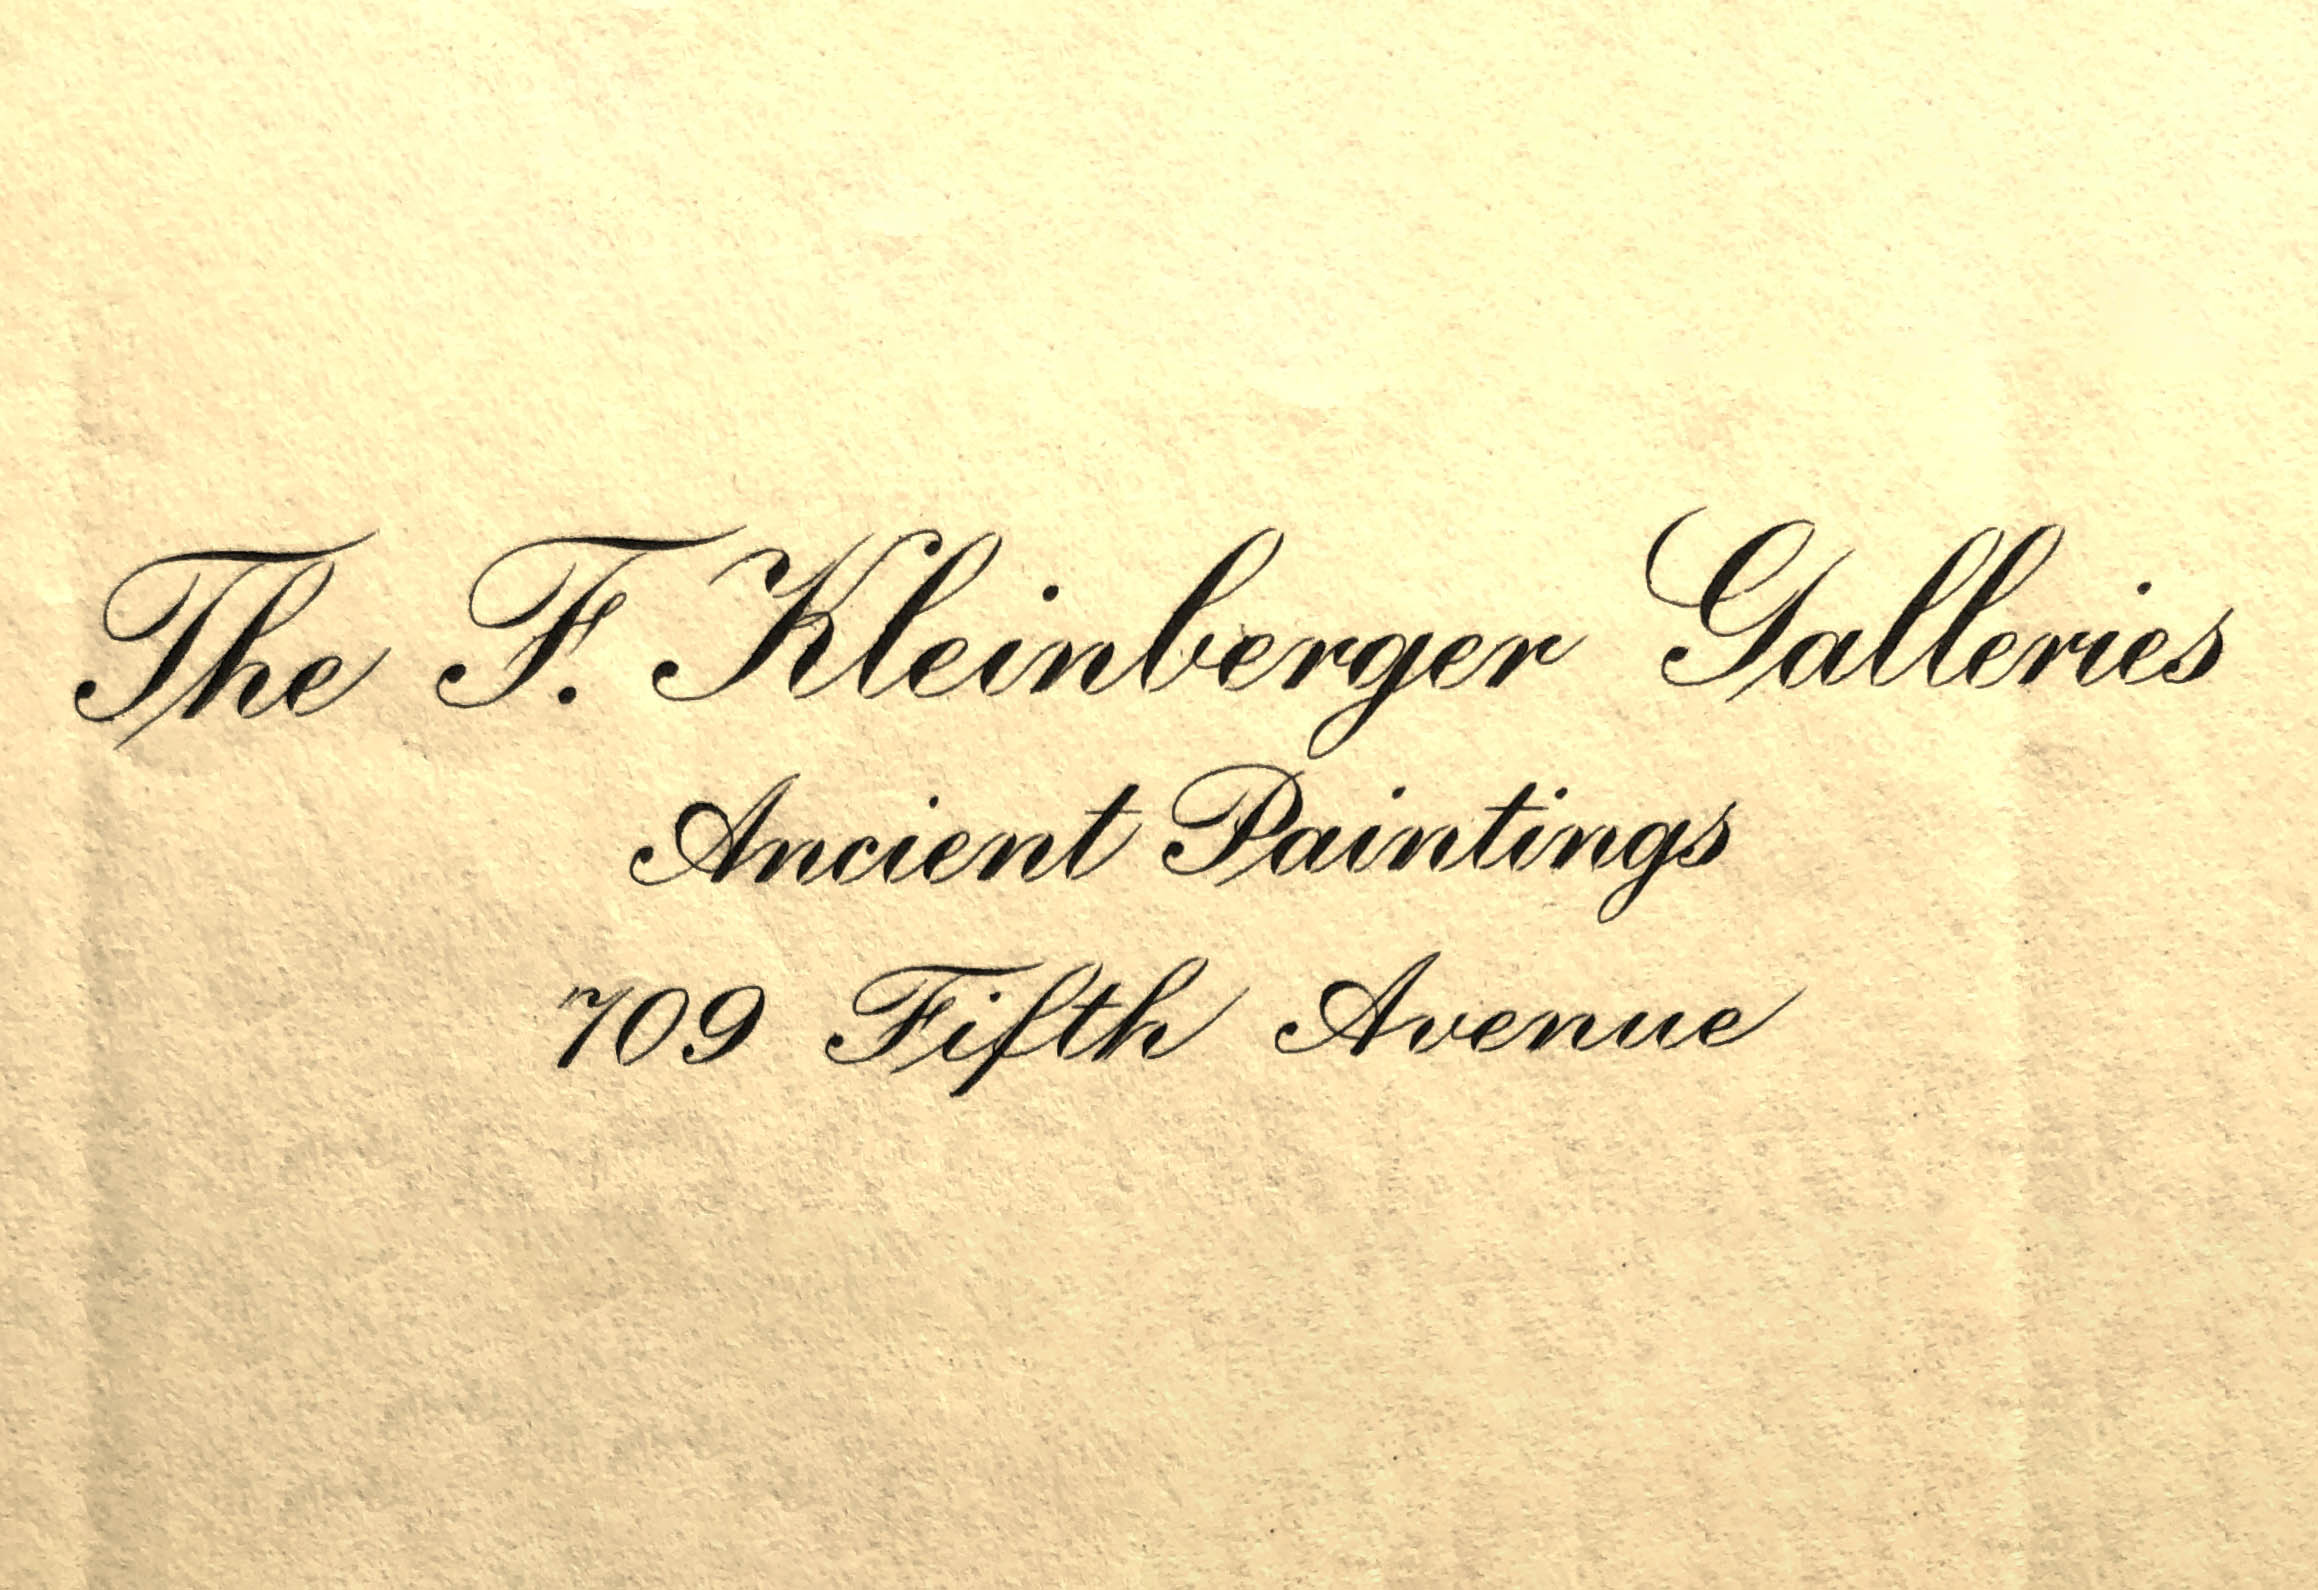 Letterhead on cream-colored paper that reads: The F. Kleinberger Galleries, Ancient Paintings, 709 Fifth Avenue